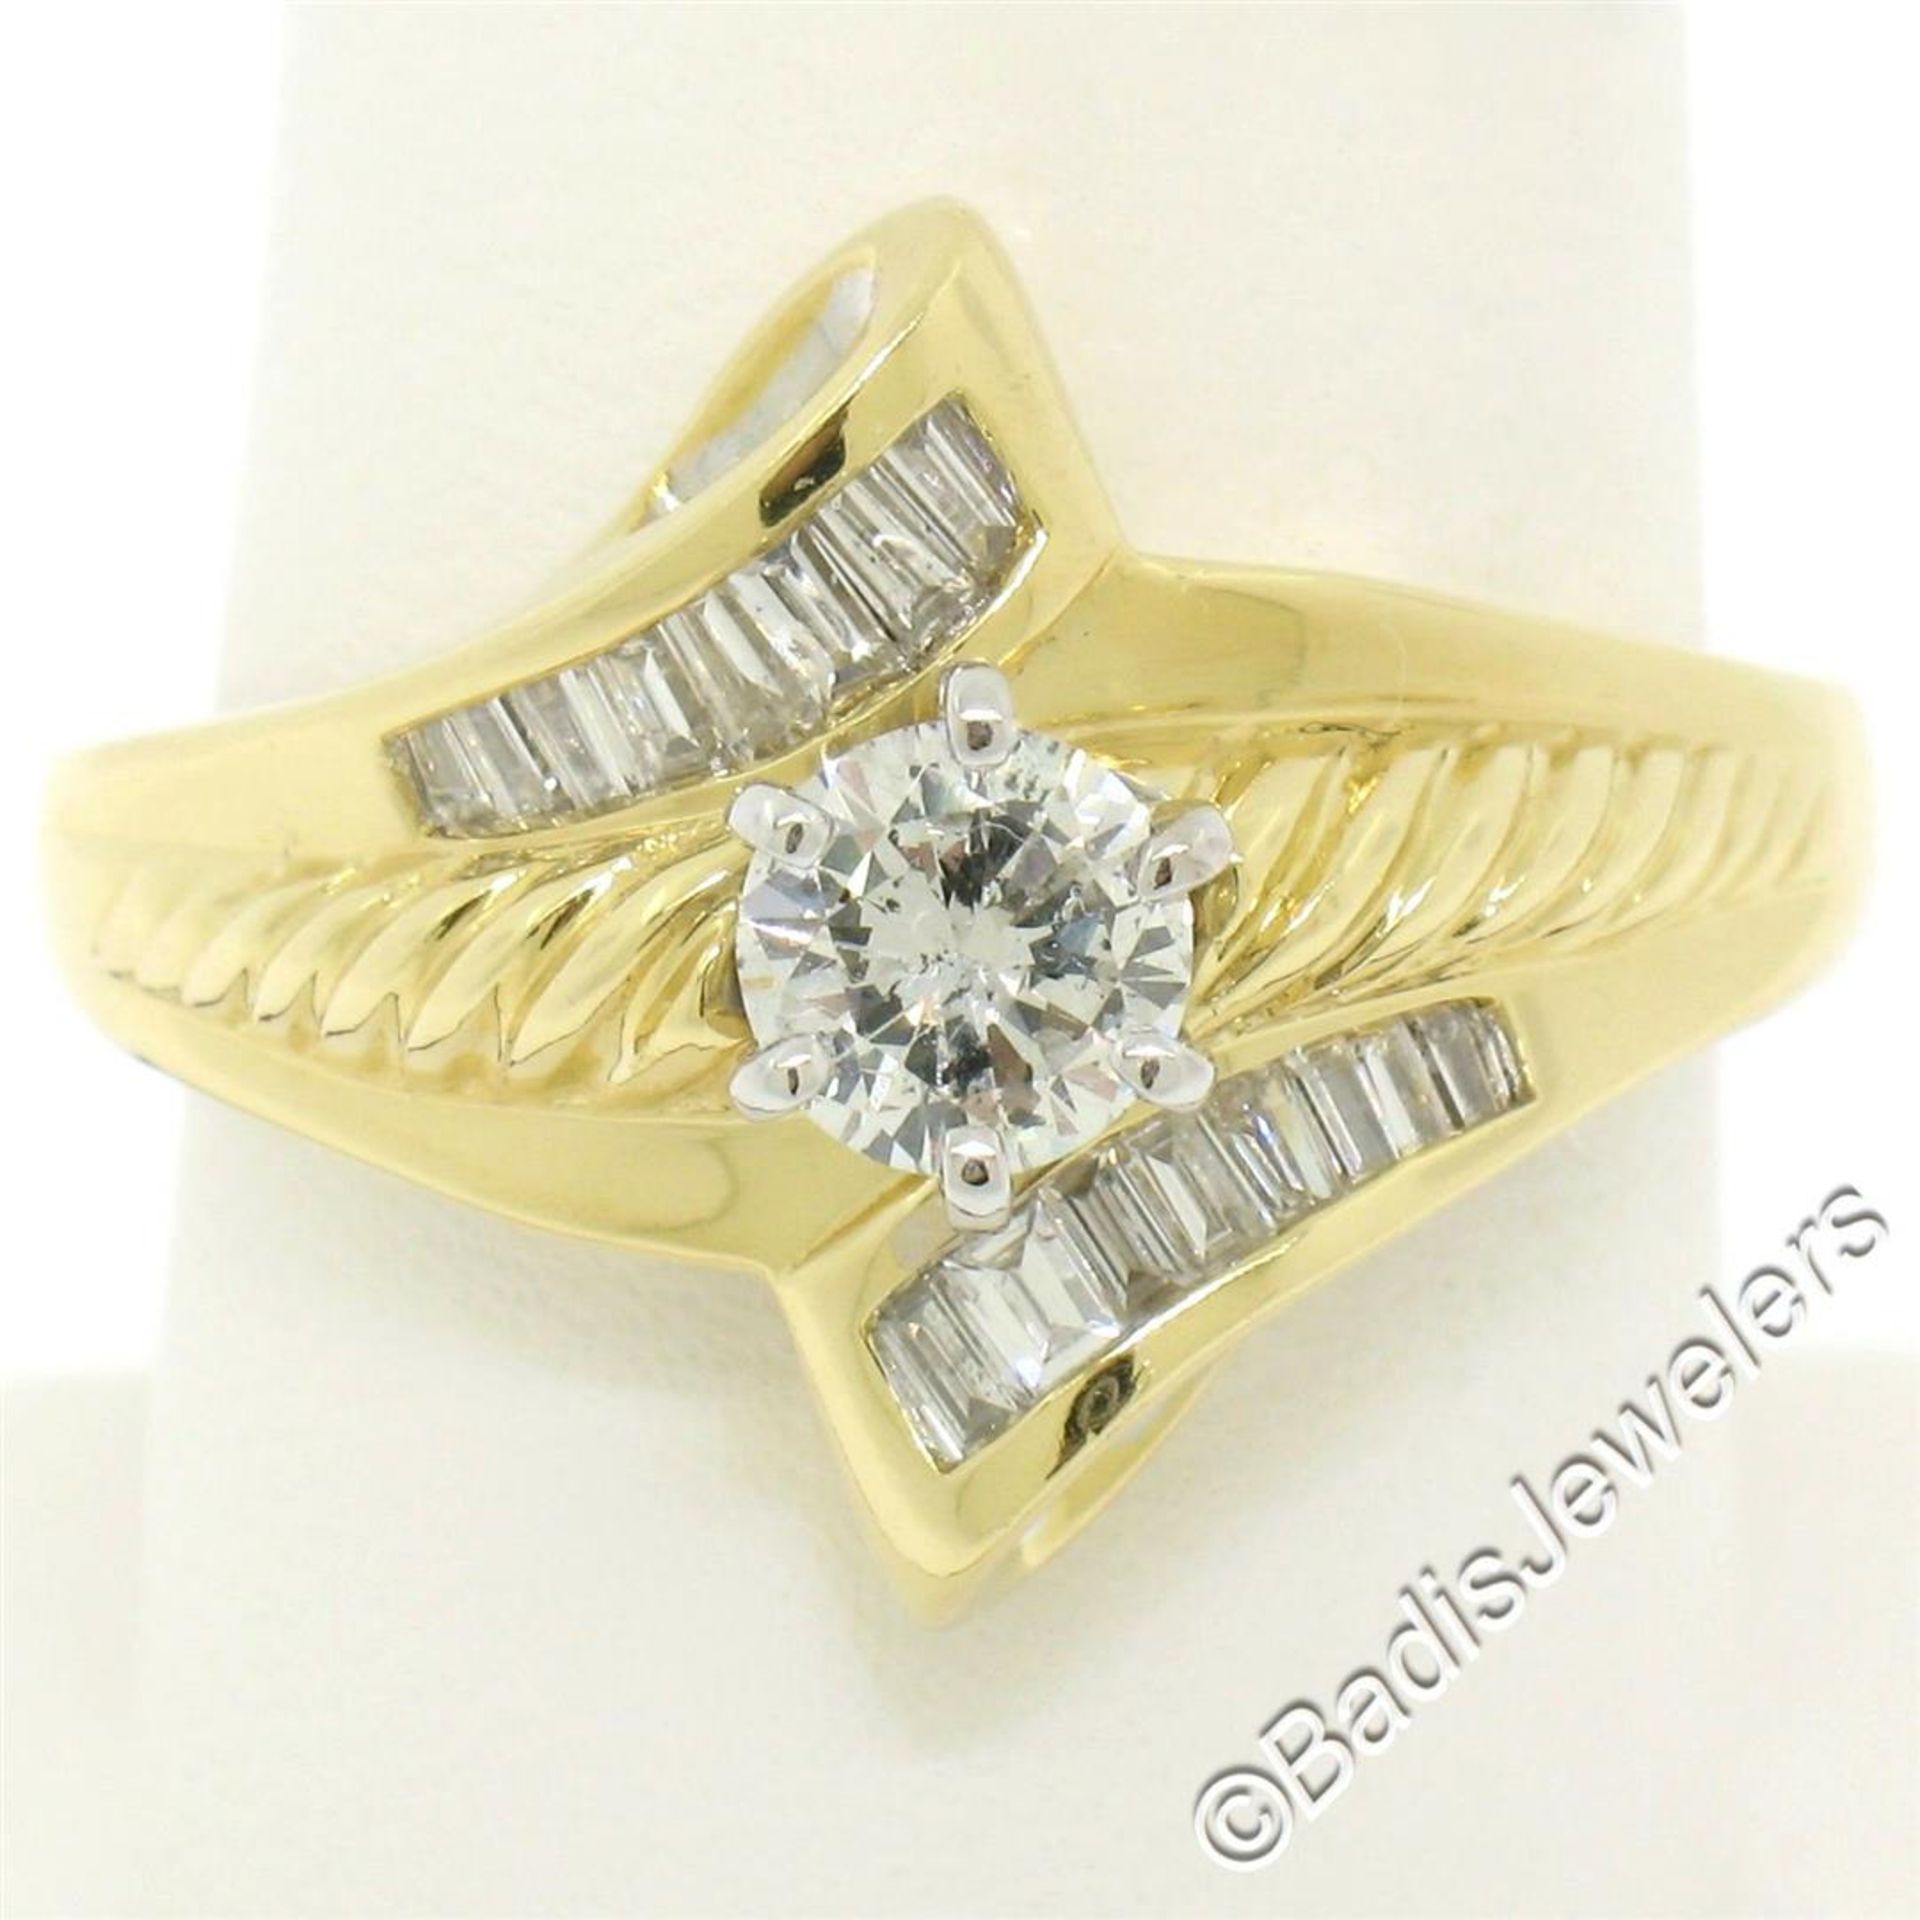 18kt Yellow and White Gold 0.90ctw Round and Baguette Diamond Ring - Image 4 of 8